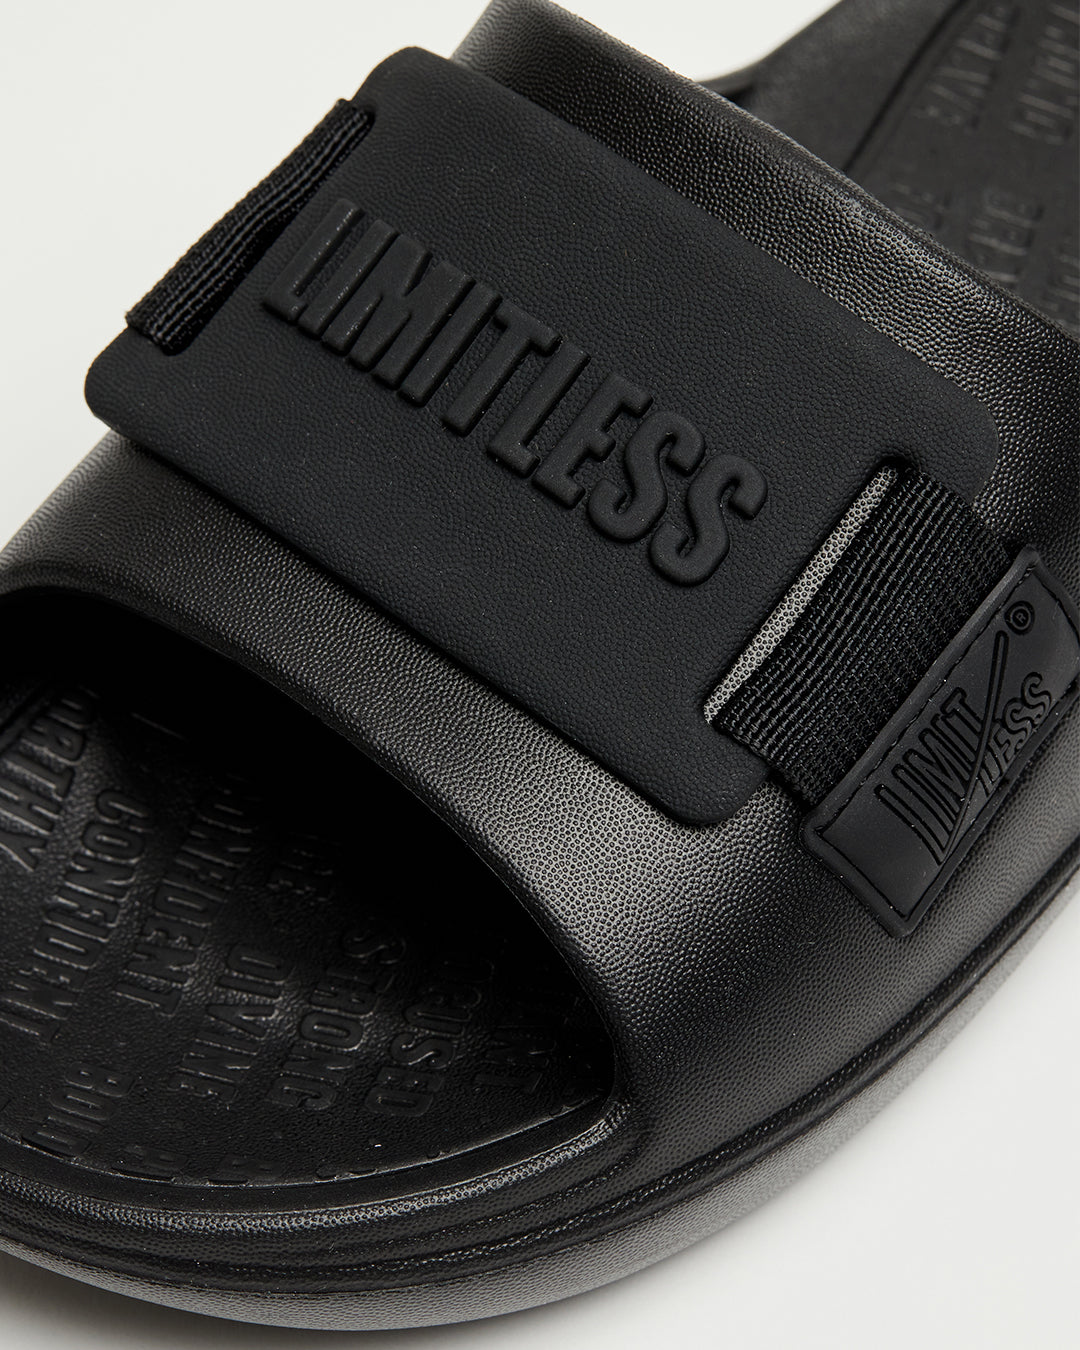 LIMITLESS SLIDES™ WITH ESSENTIAL TIBAH™ QUAD - CAPITAL HIGH SCHOOL EDITION